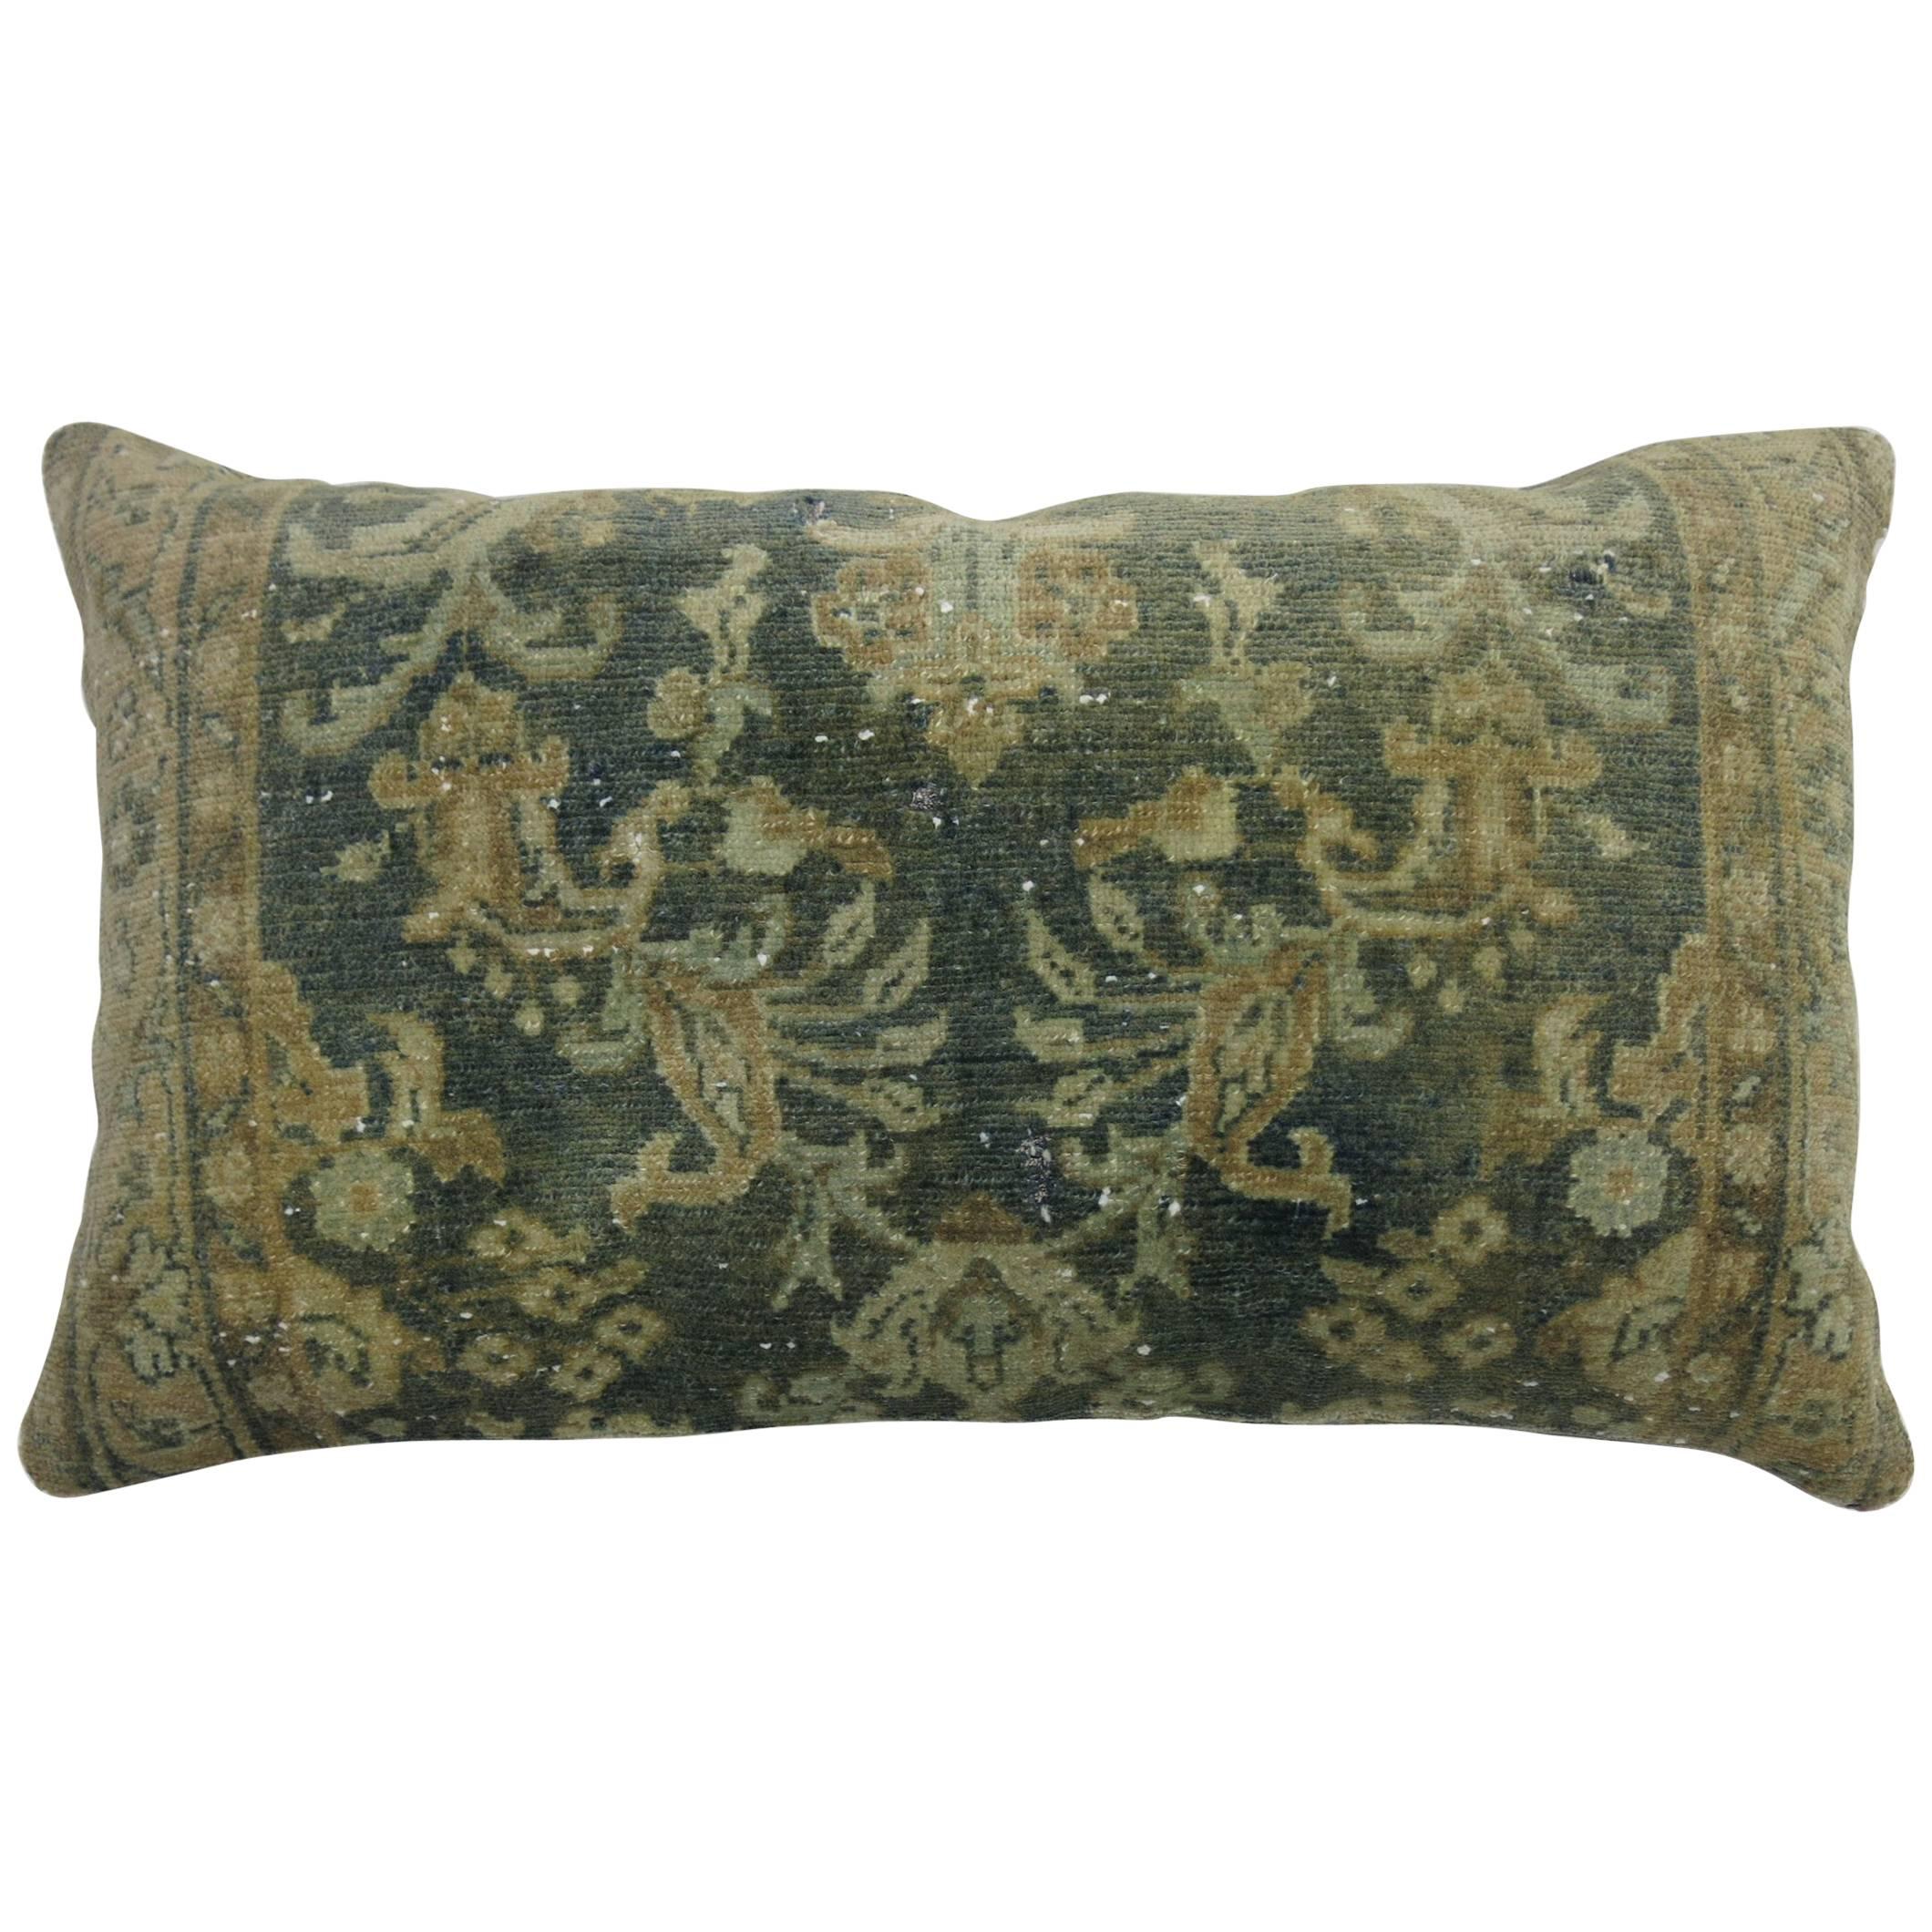 Large Vintage Persian Earth Tone Rug Pillow